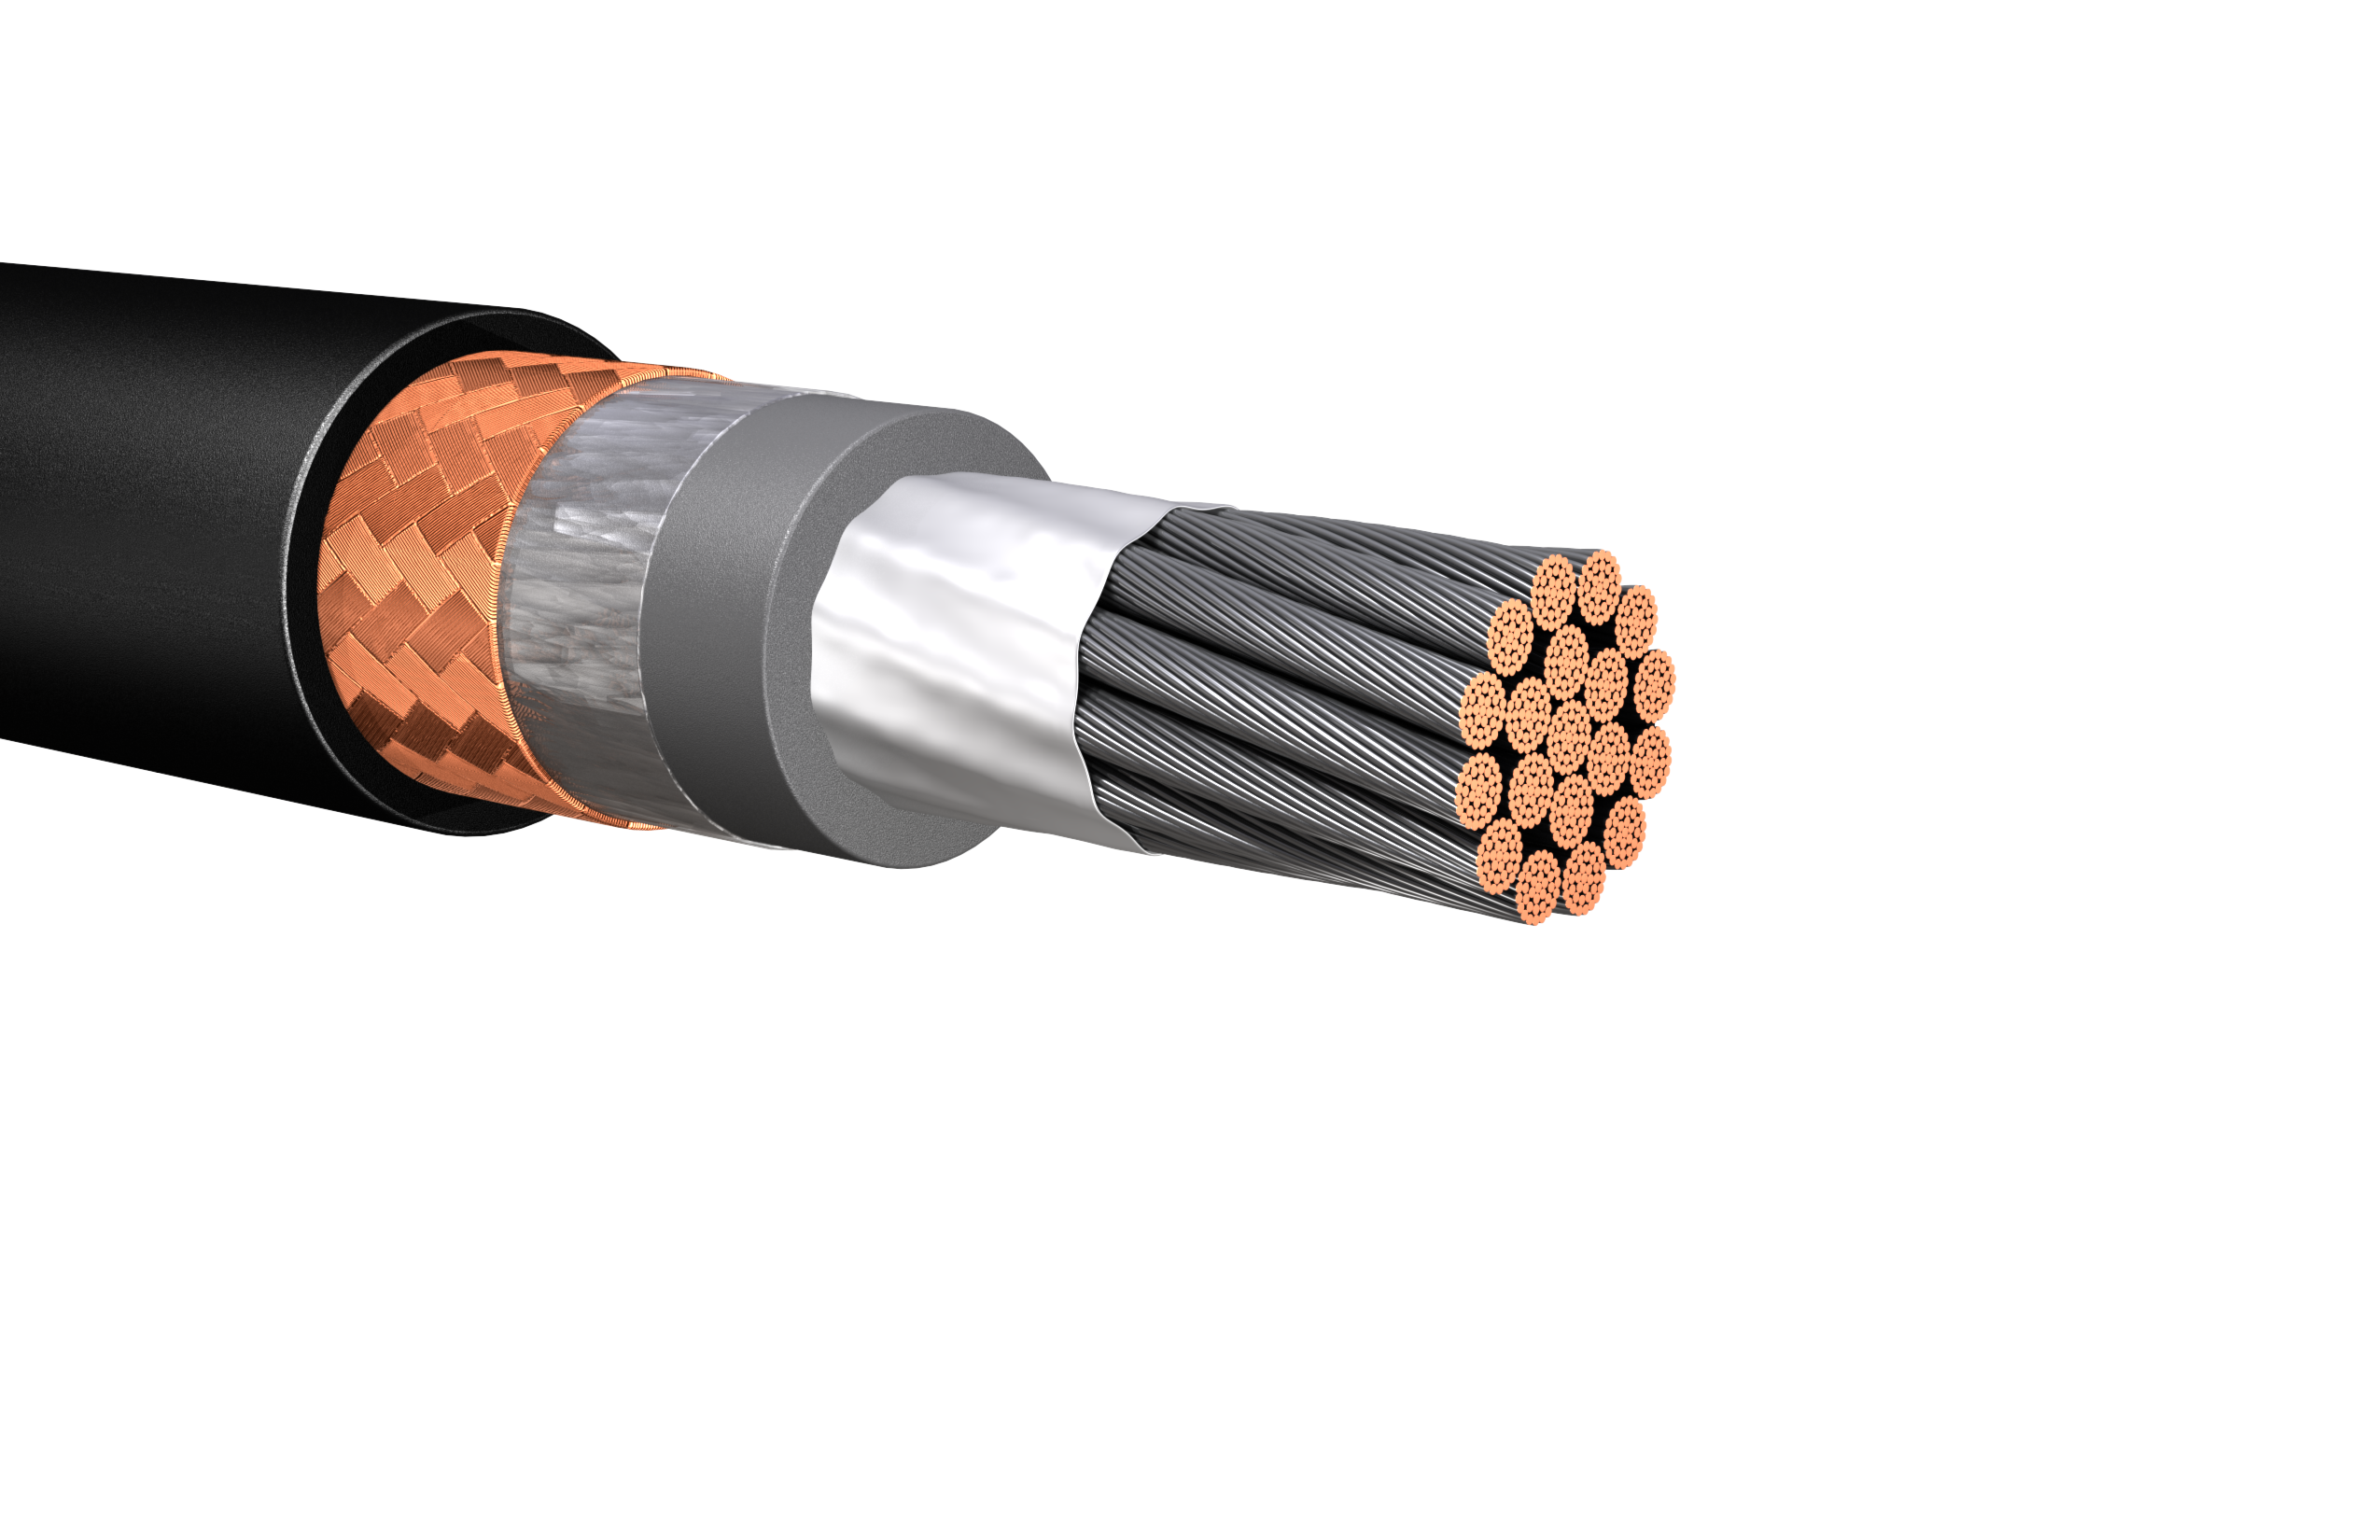 HW263: 2kV Single Conductor Power Cable, Armored & Sheathed